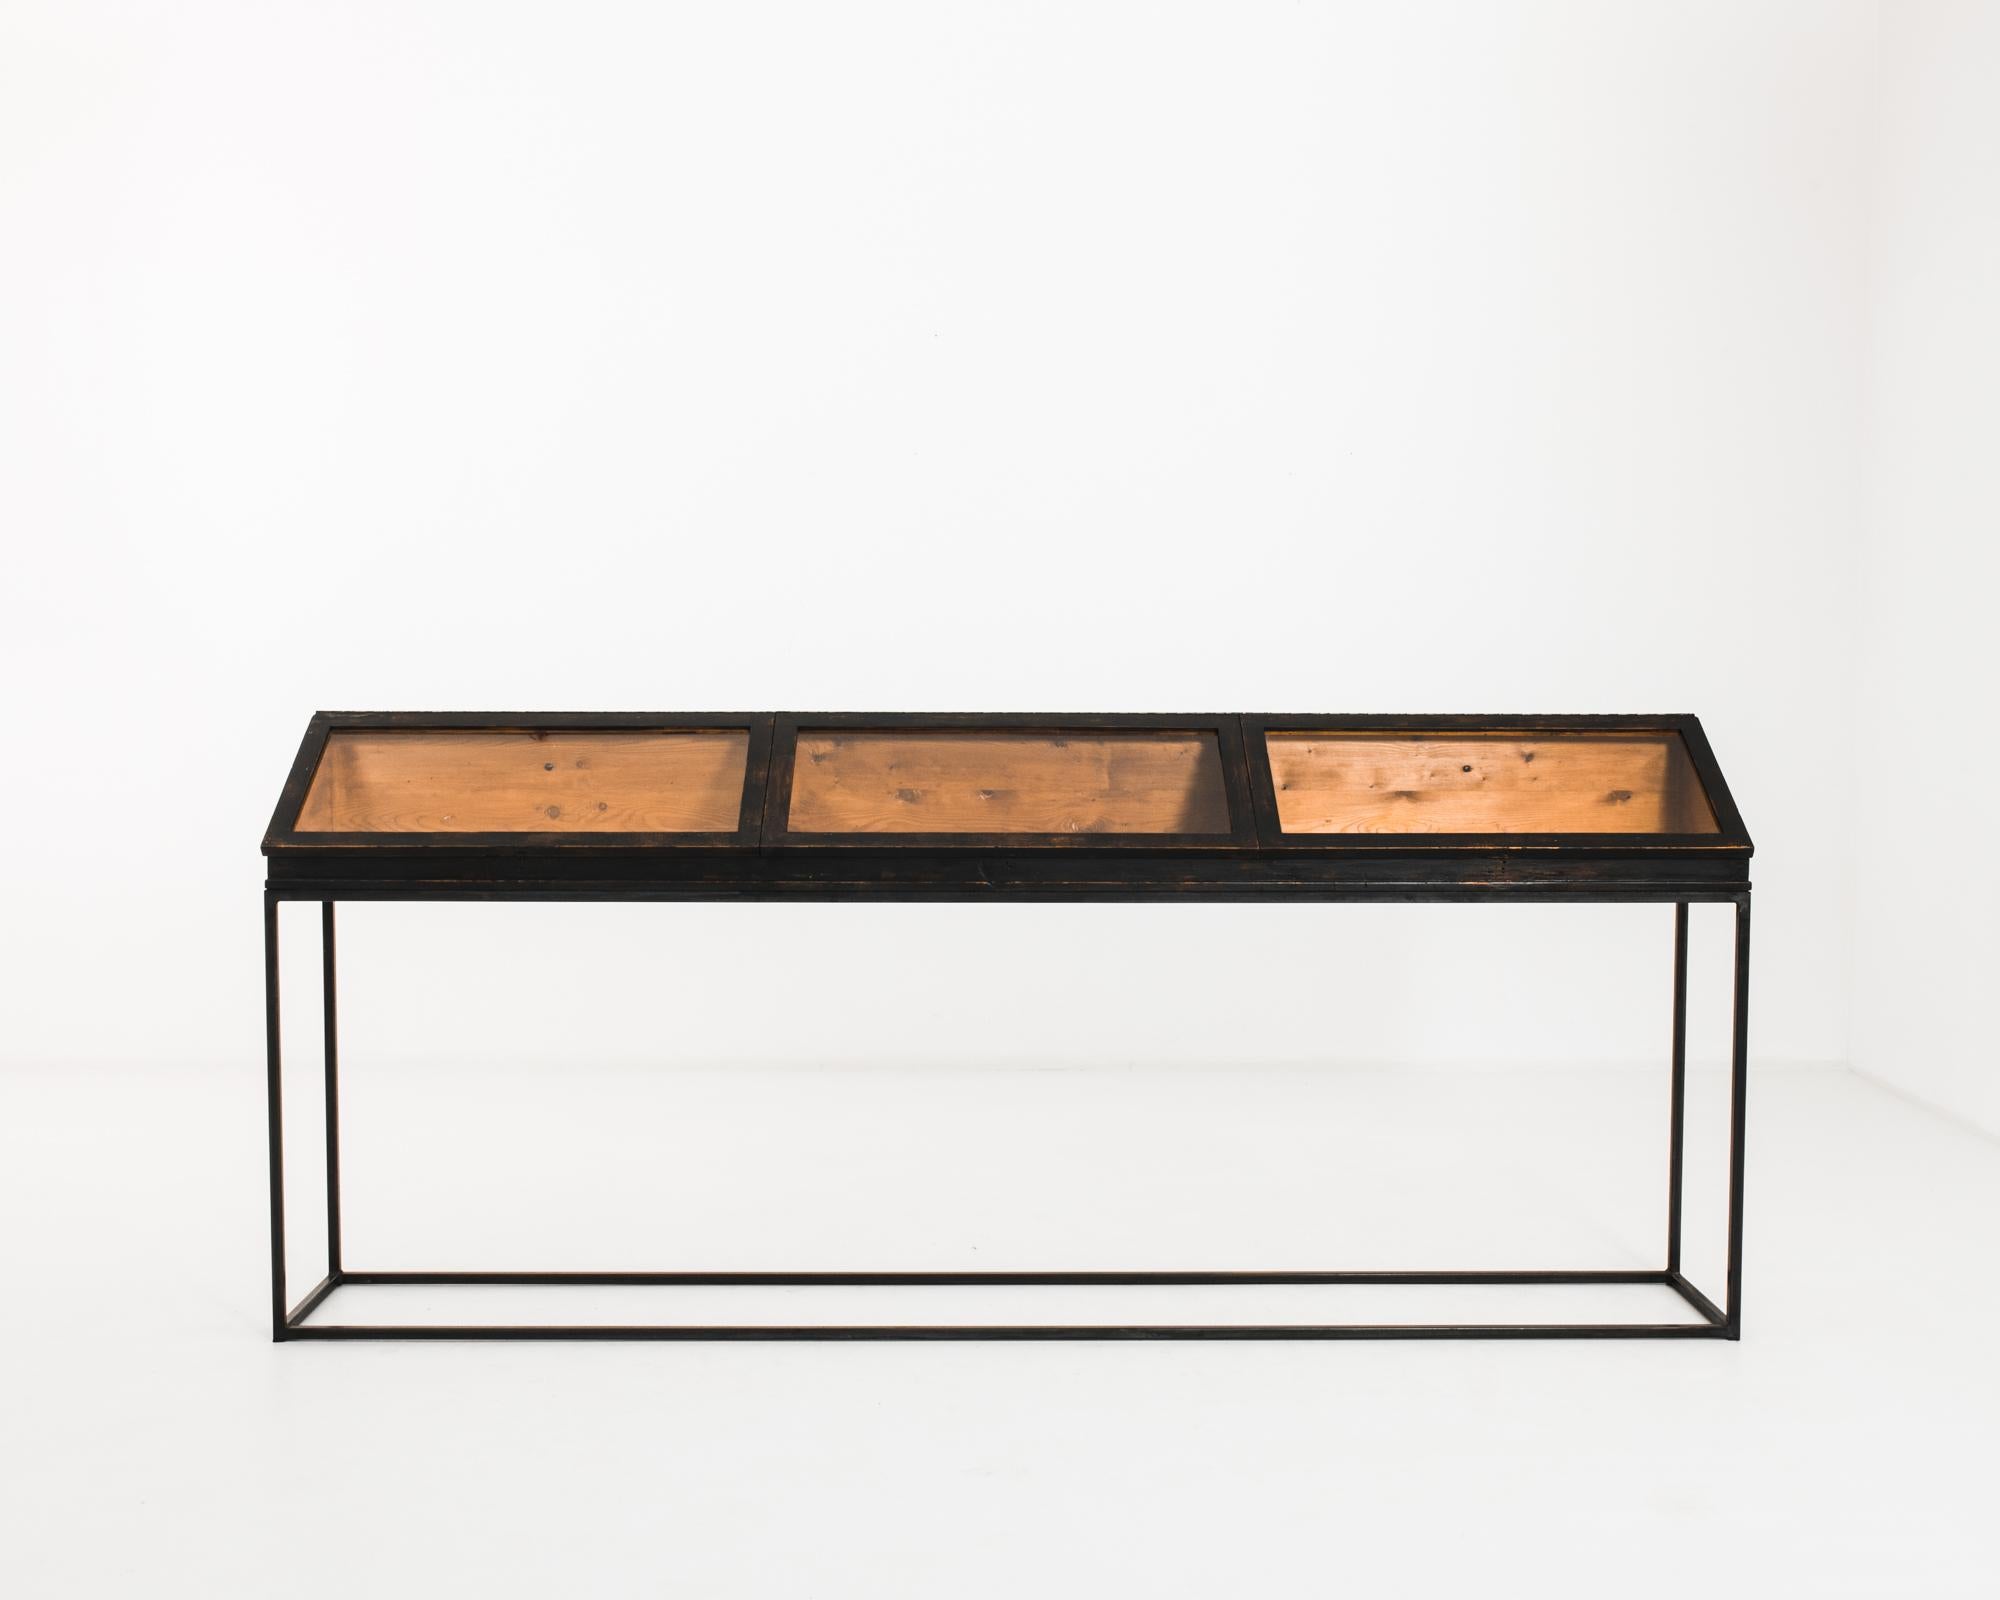 This wood and metal jewelry discounter counter was made in France, circa 1950. The angular metal base and oblique vitrine comprise the clean geometric silhouette of this Mid-Century Modern design piece. It features three compartments, easily